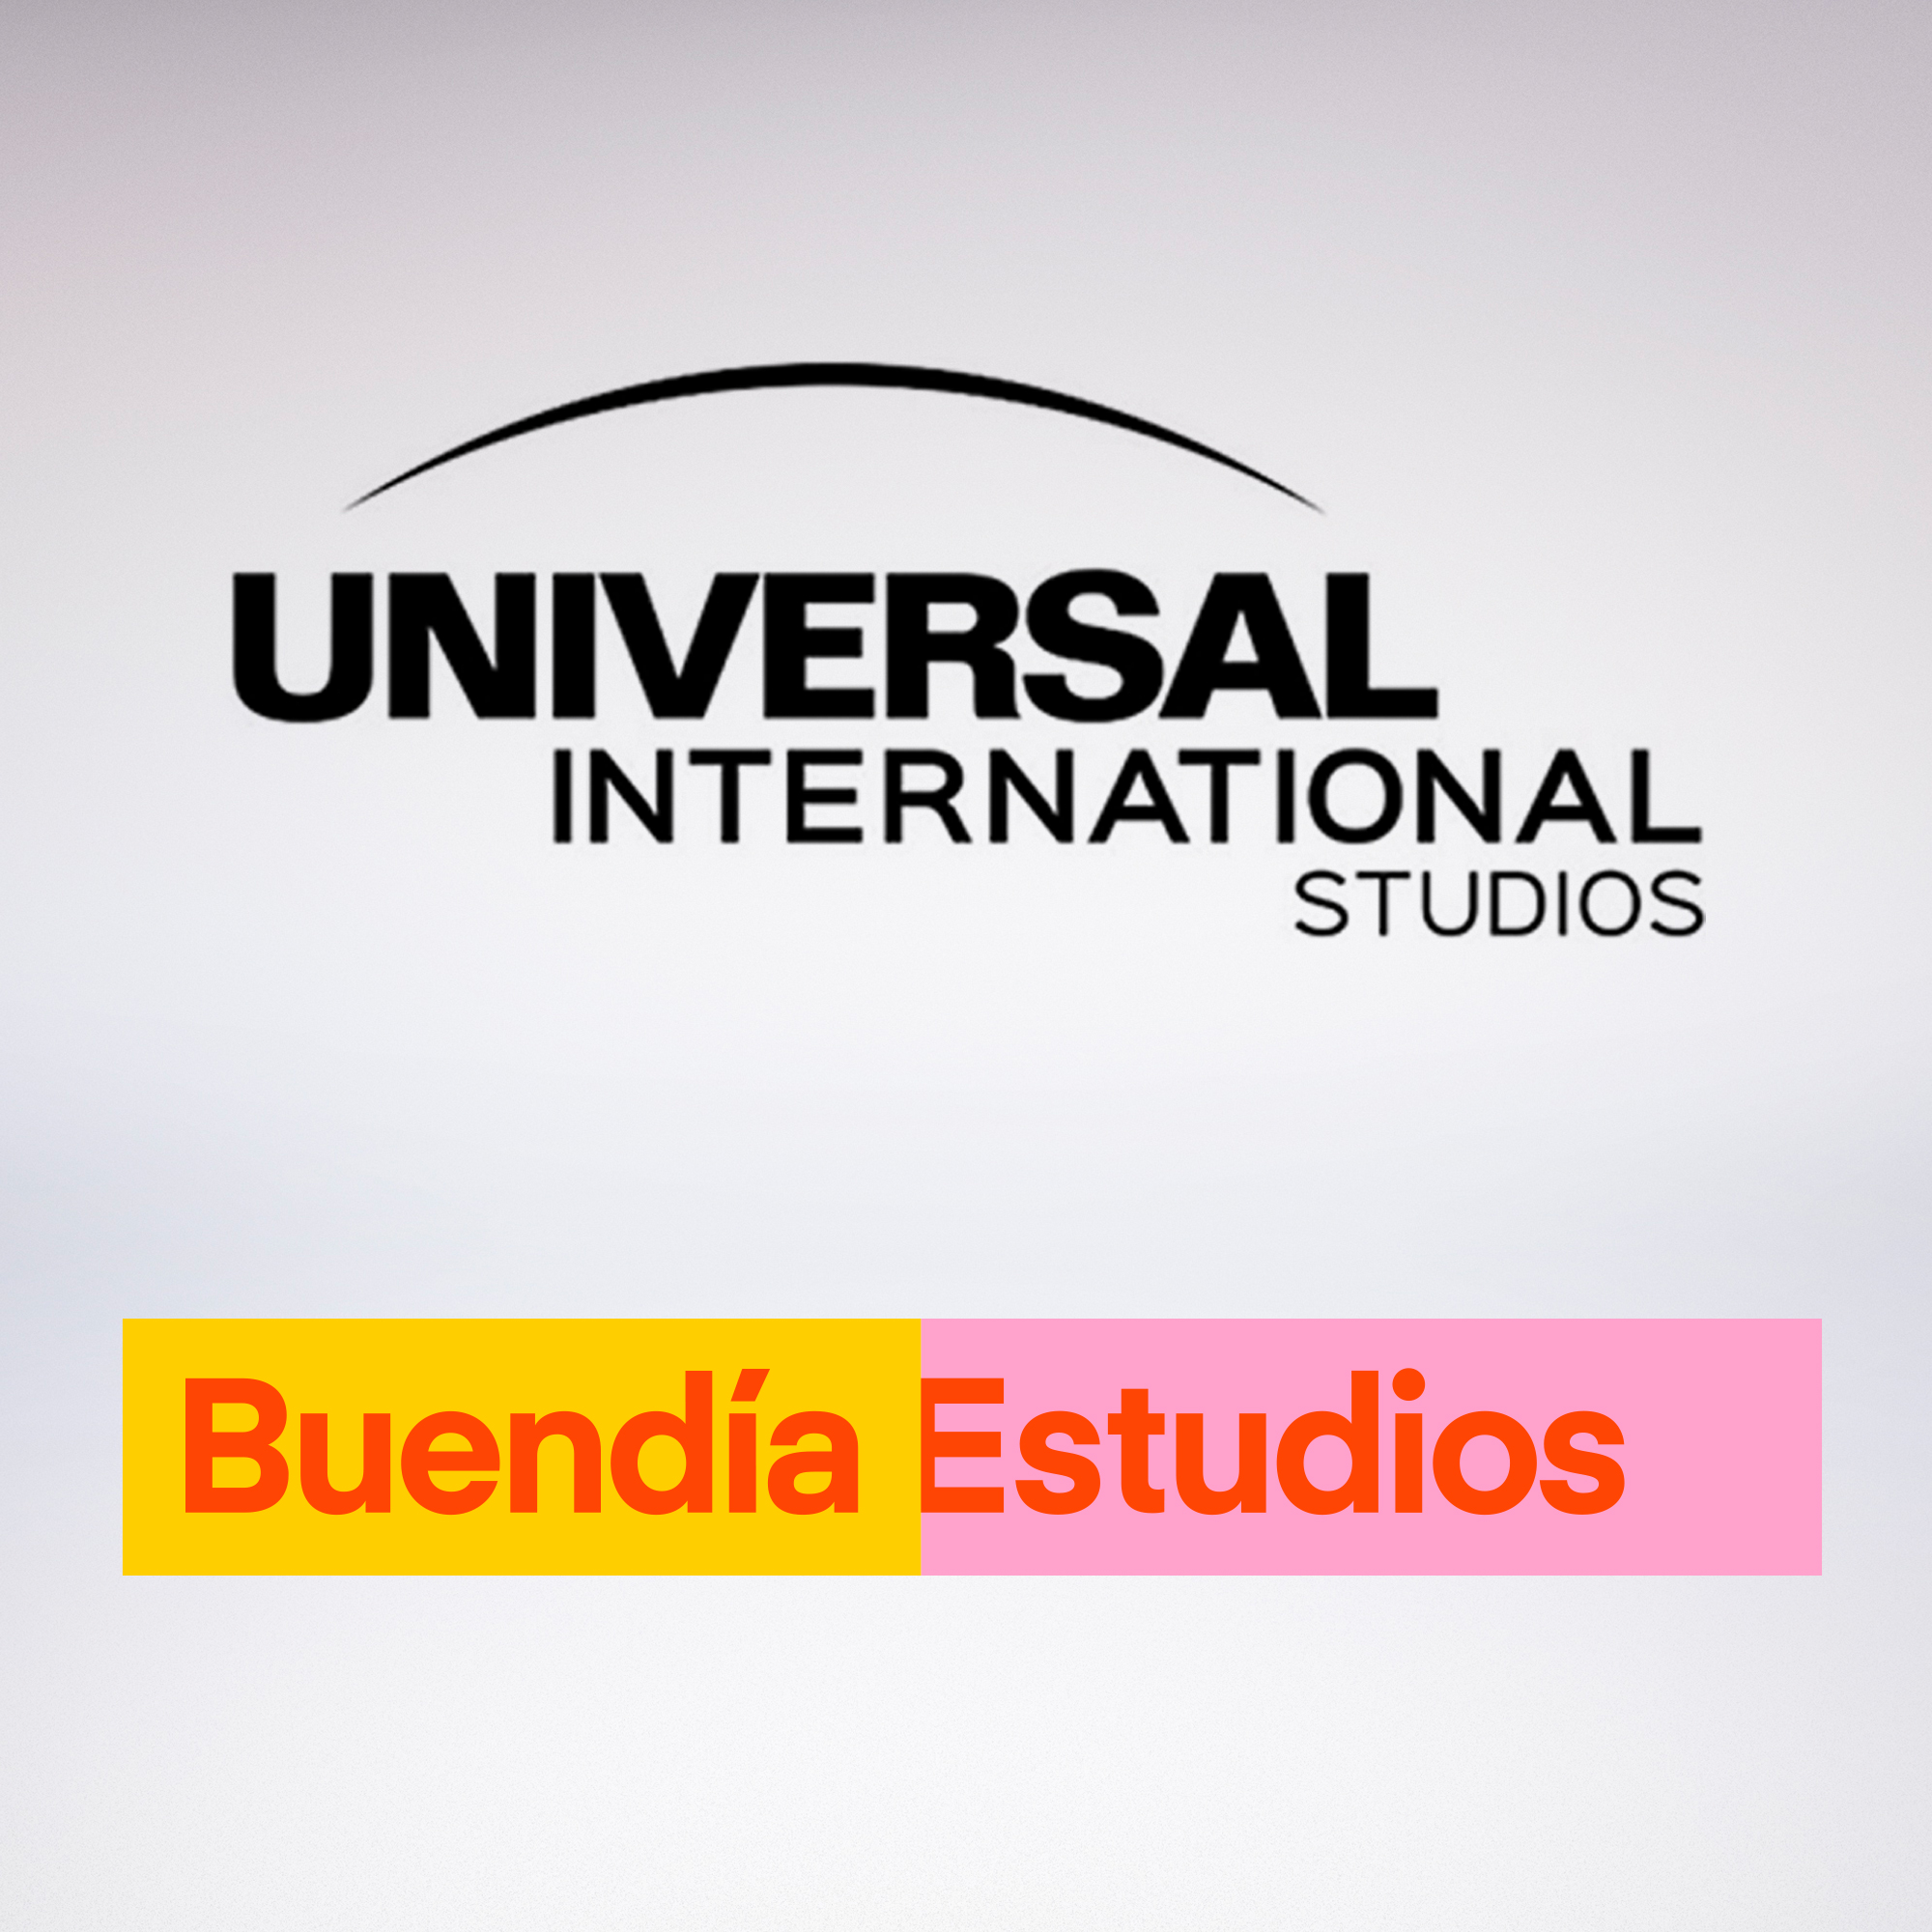 Buendía Estudios closes an agreement with Universal International Studios to create series in Spanish